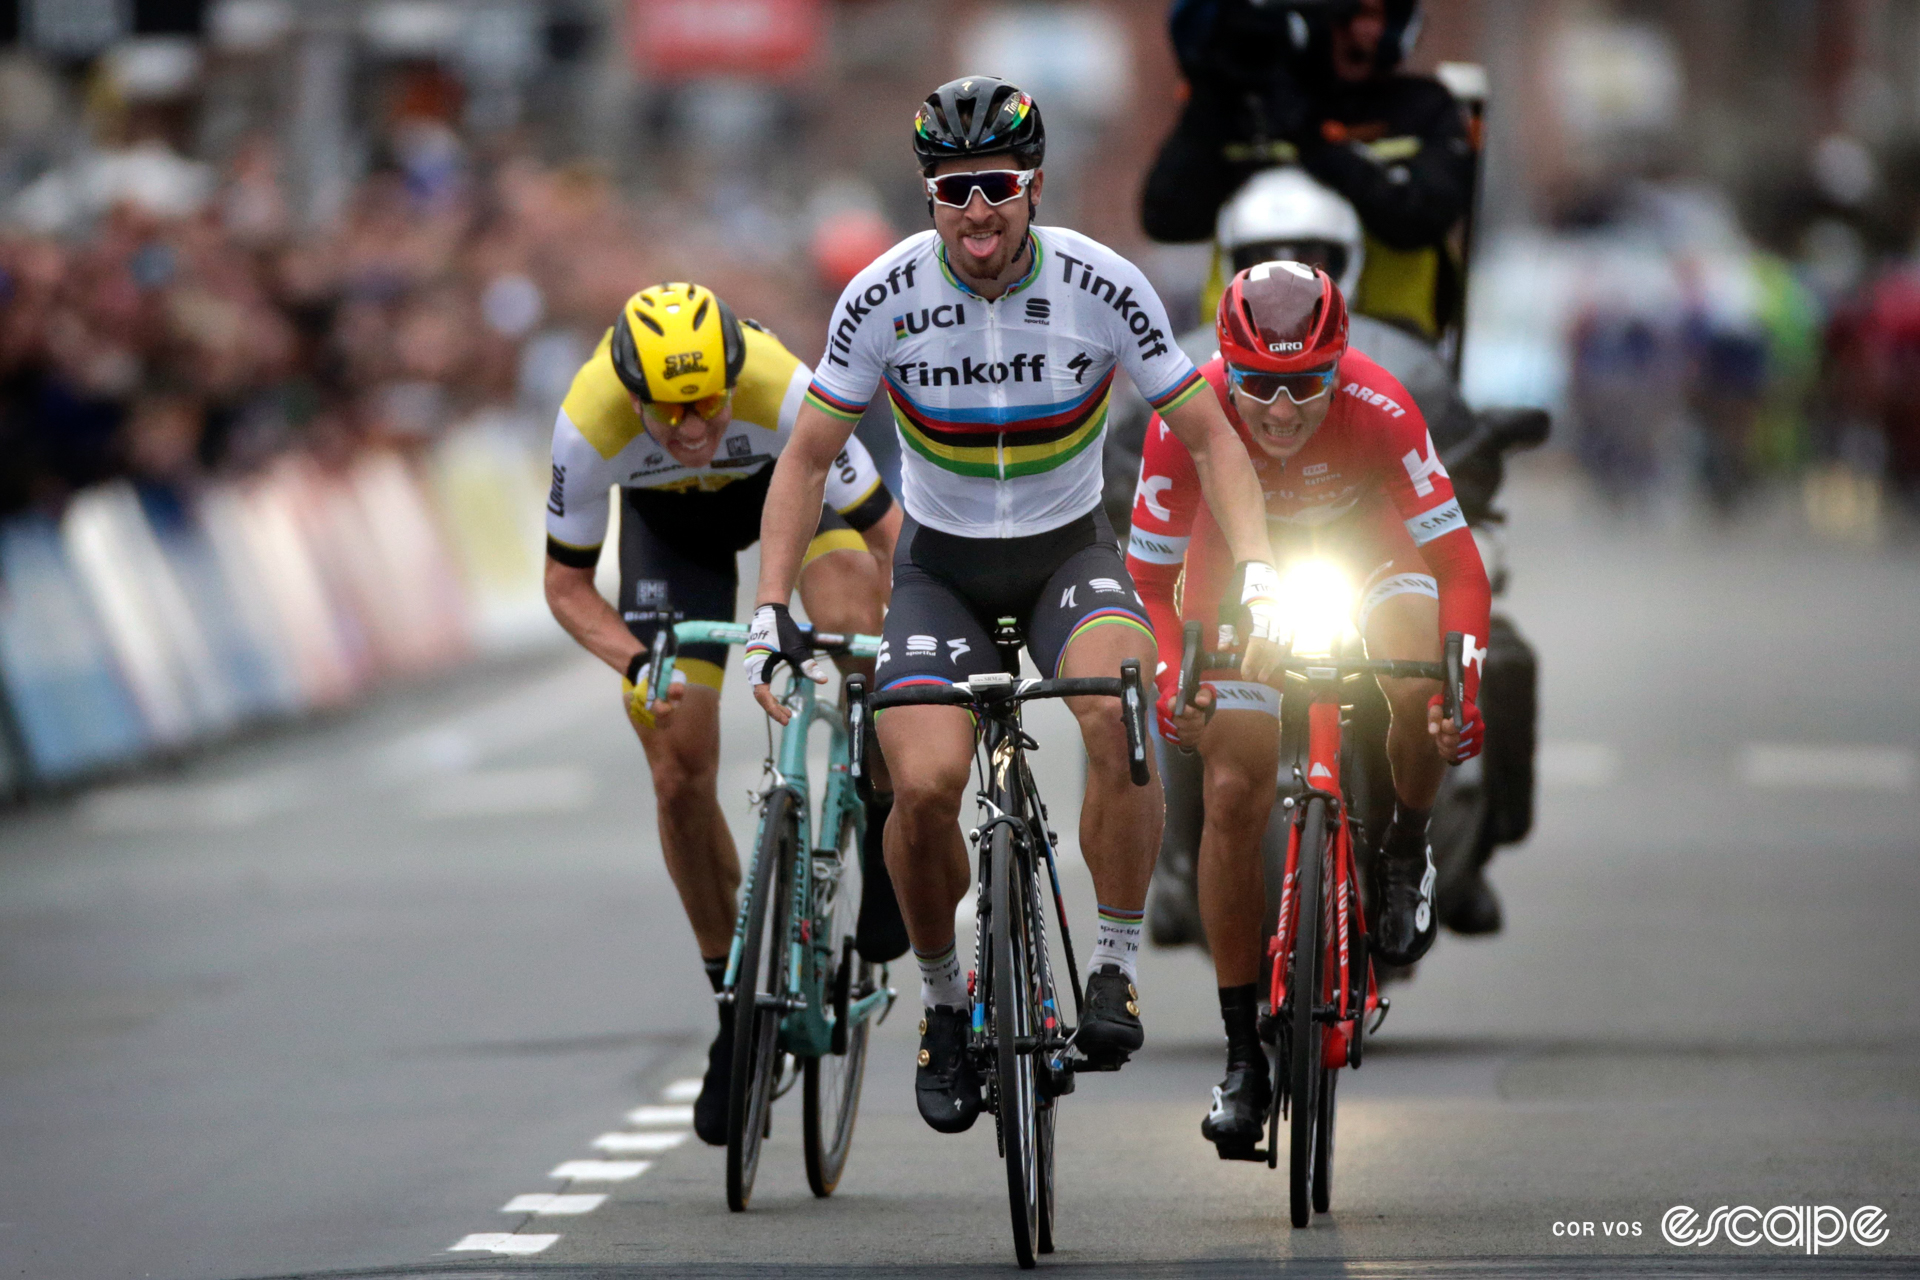 Peter Sagan celebrates winning the 2016 Gent-Wevelgem with his tongue out.